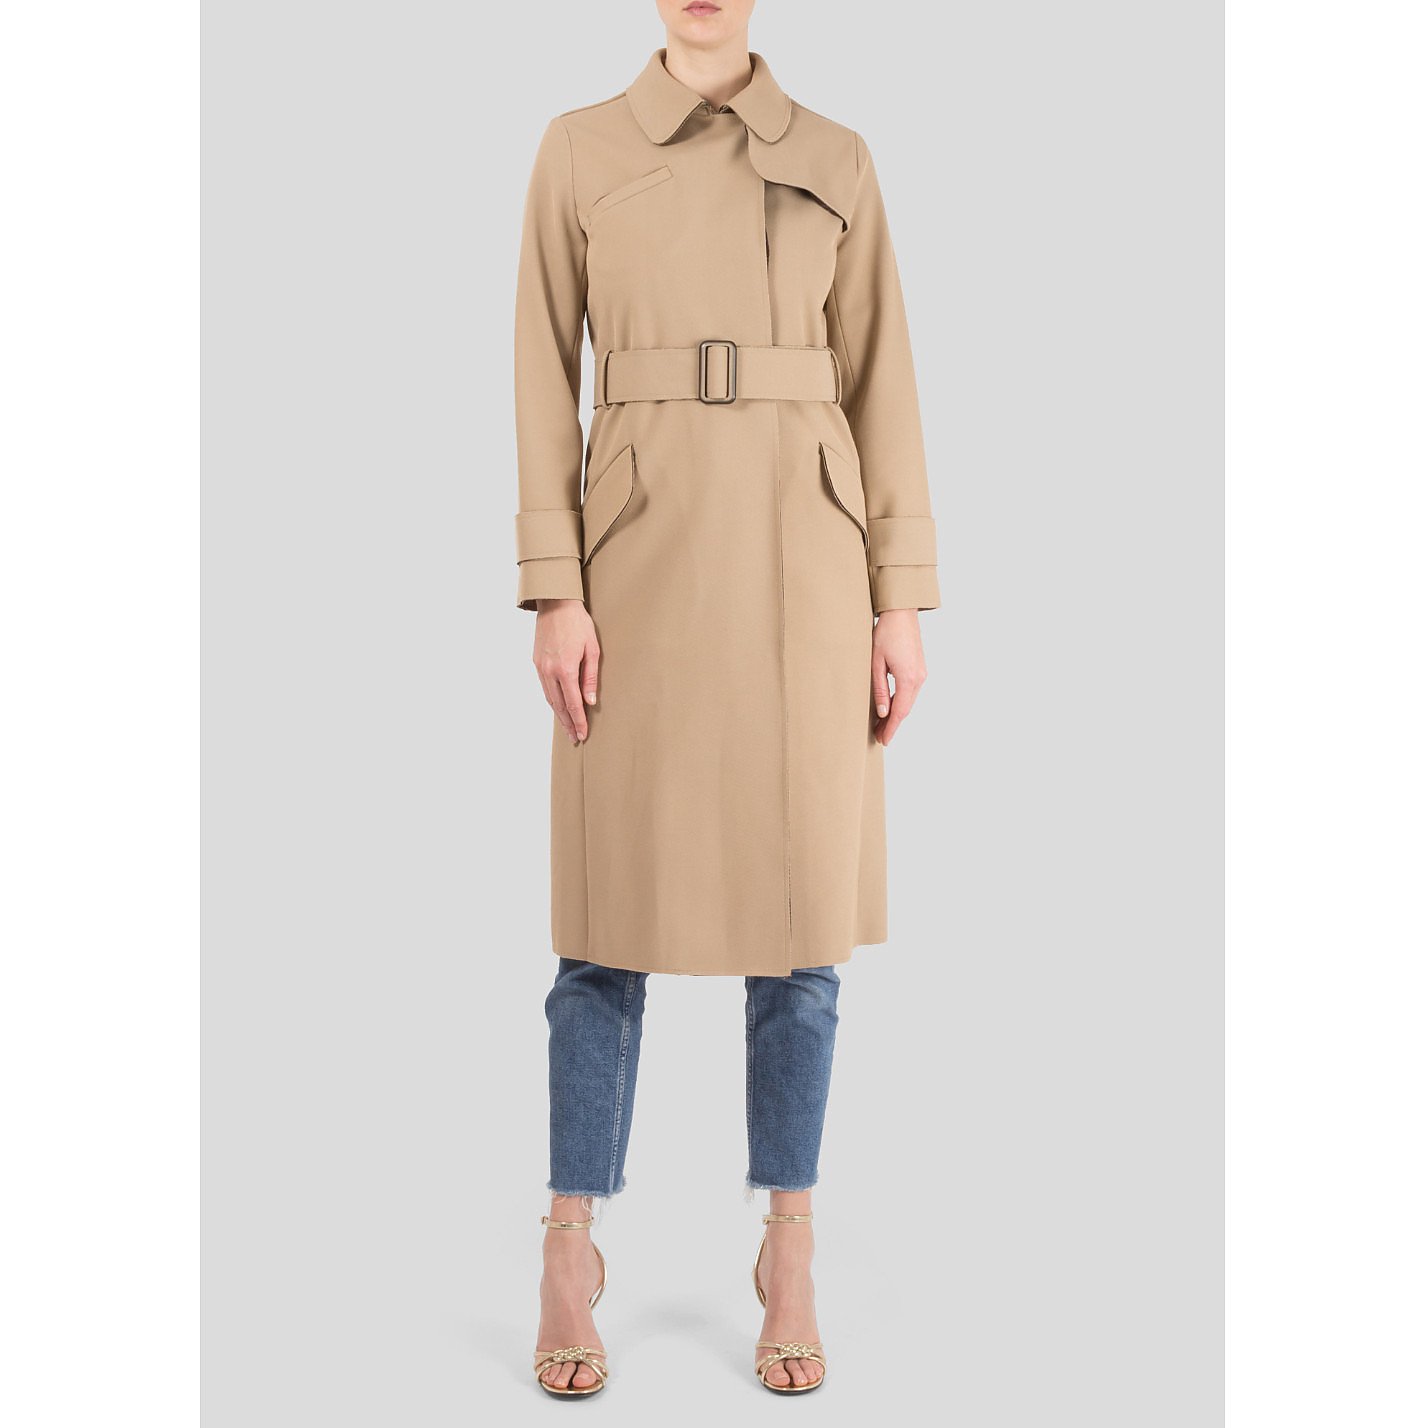 Finery Belted Trench Coat